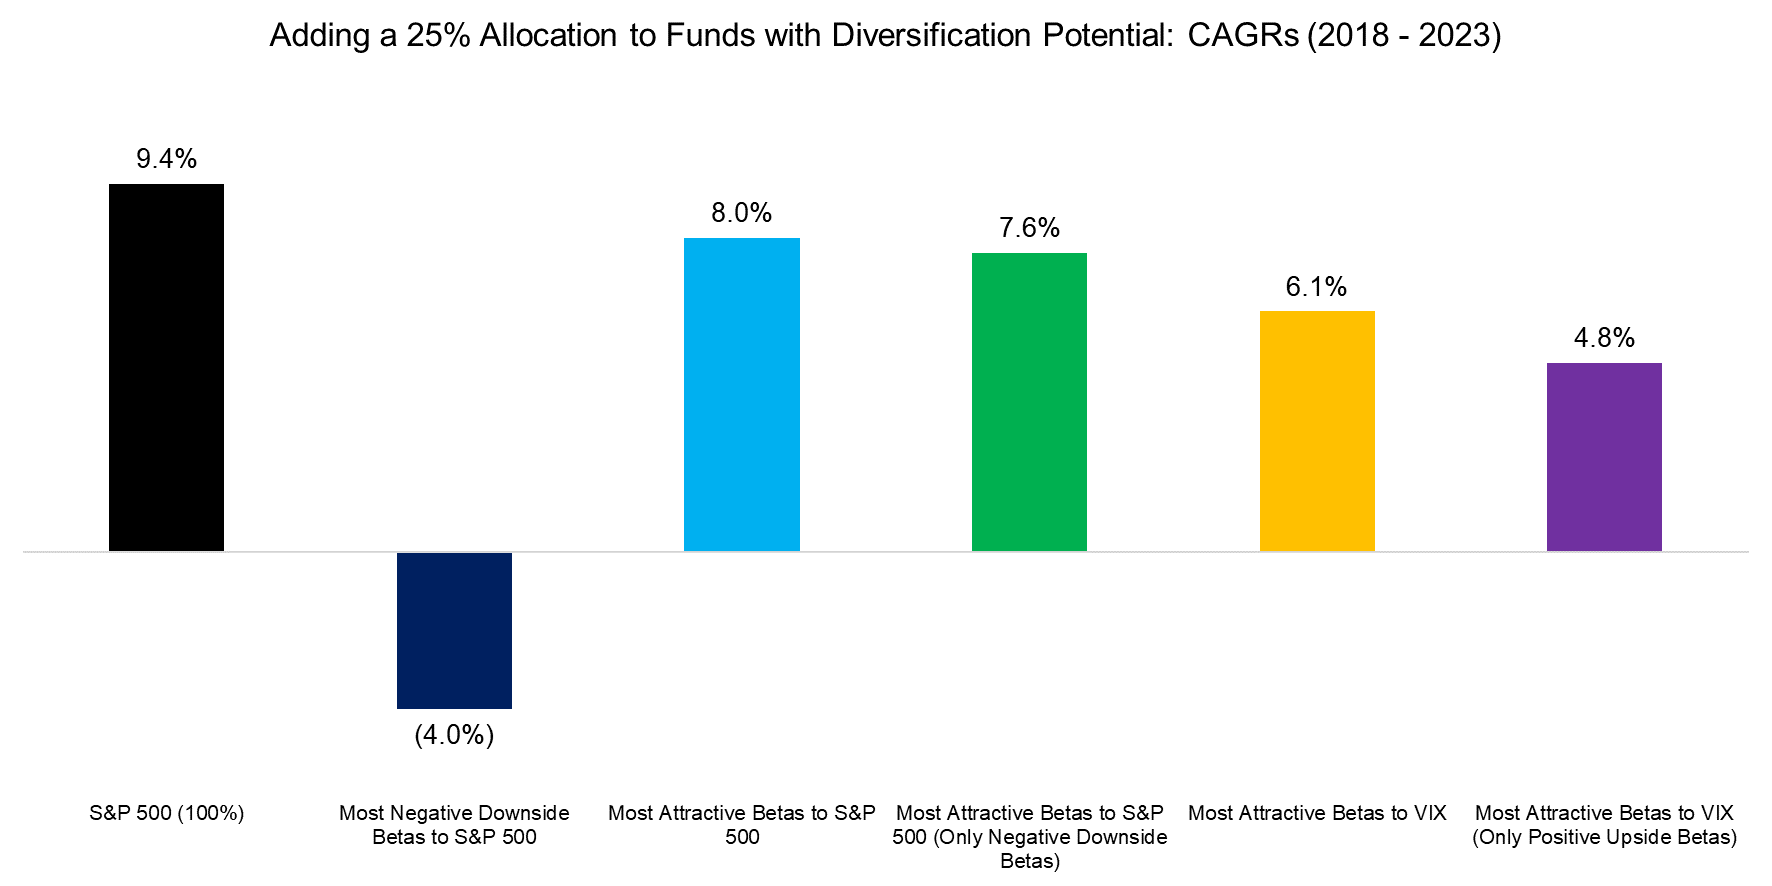 Adding a 25% Allocation to Funds with Diversification Potential CAGRs (2018 - 2023)